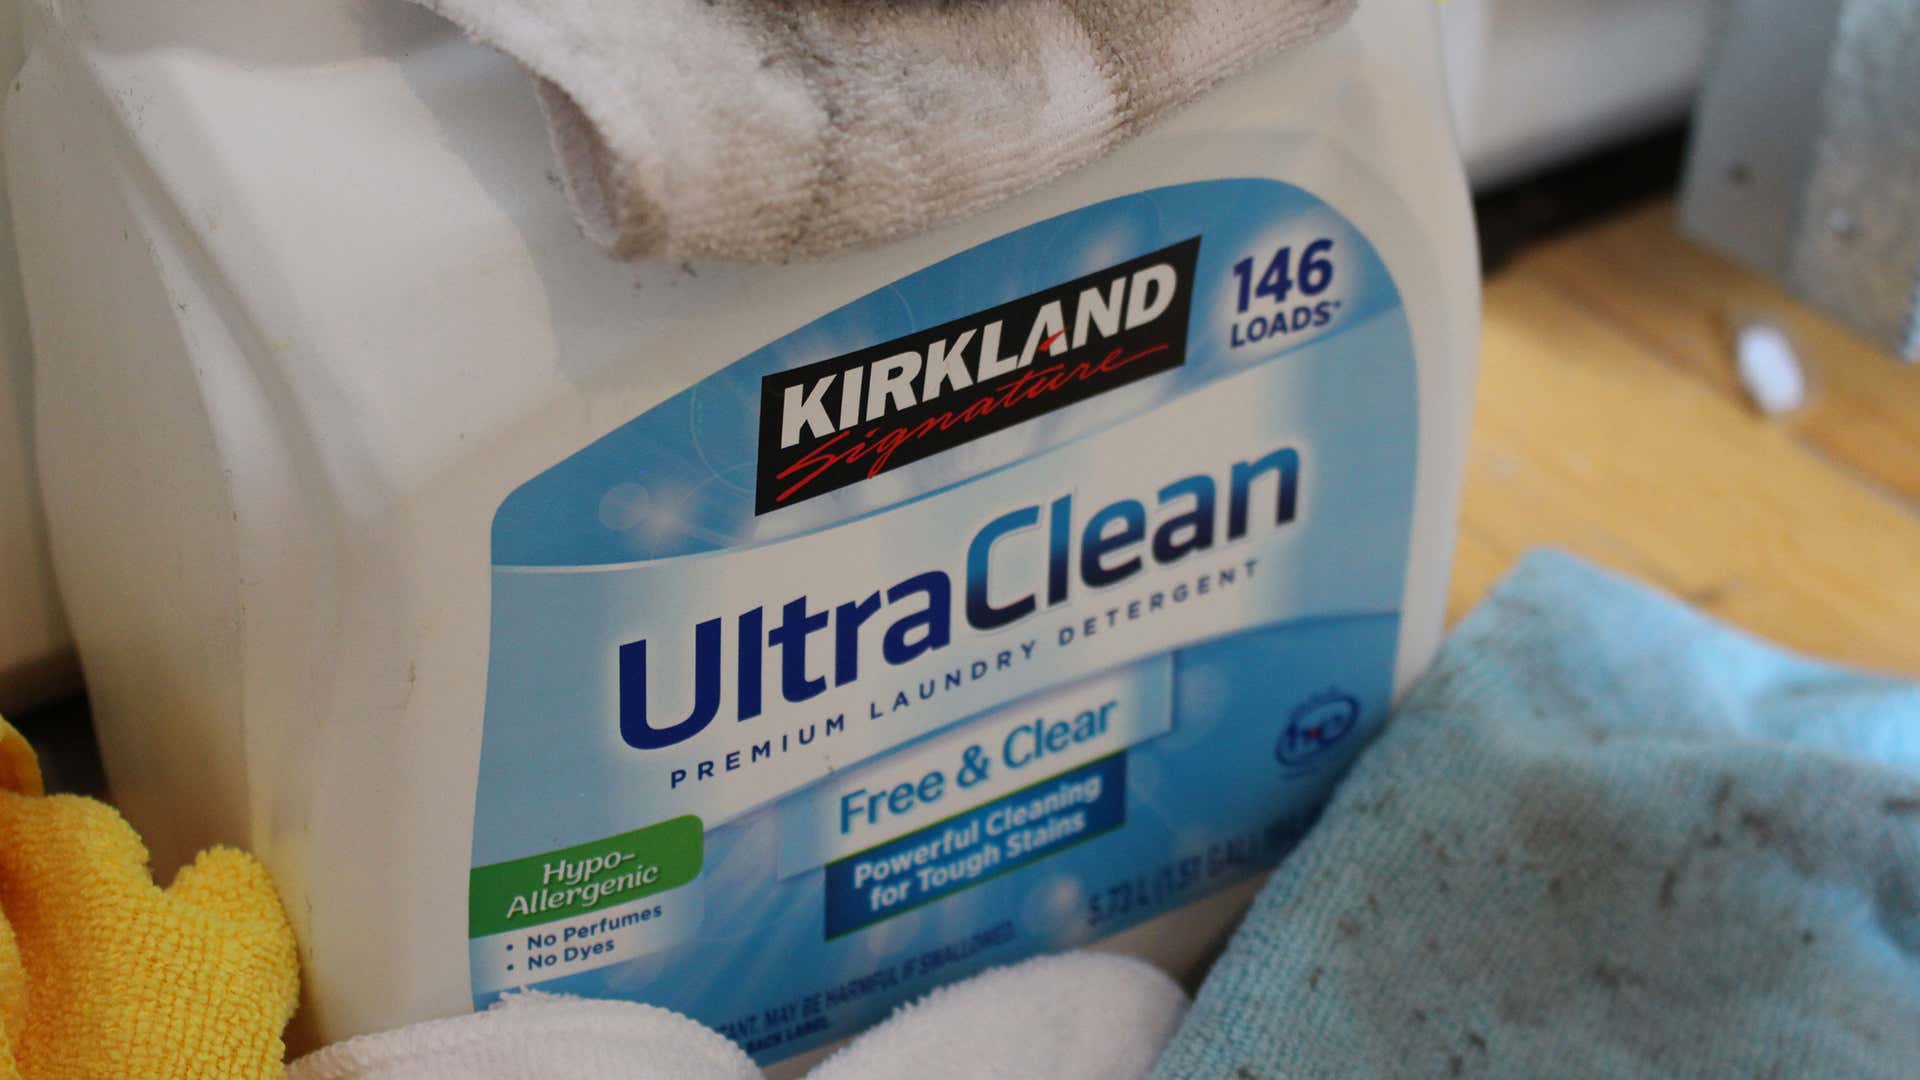 A close-up view of a large container of Kirkland Signature UltraClean Free and Clear detergent.